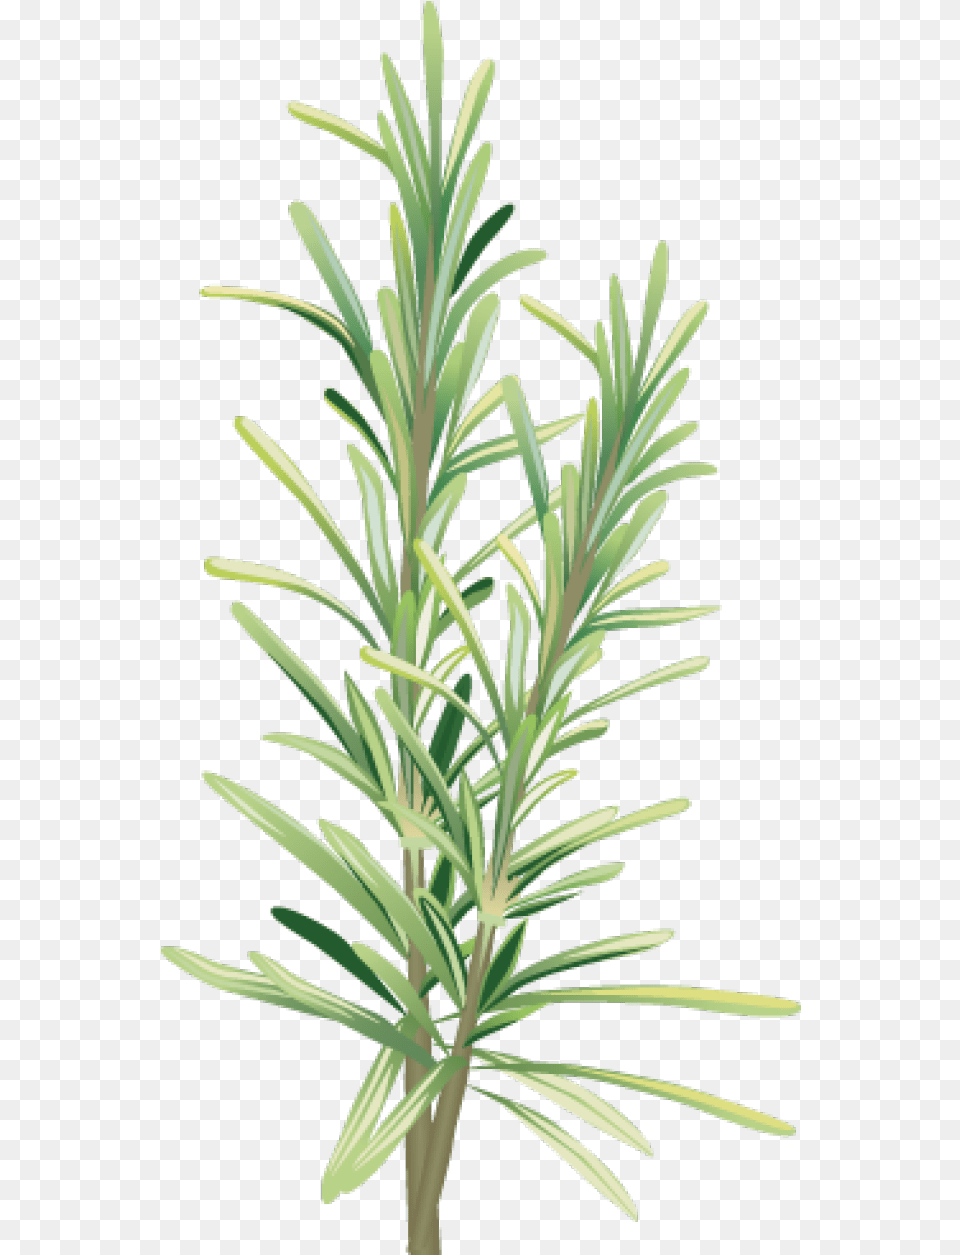 Library Of Rosemary Flower Picture Rosemary, Conifer, Herbal, Herbs, Plant Png